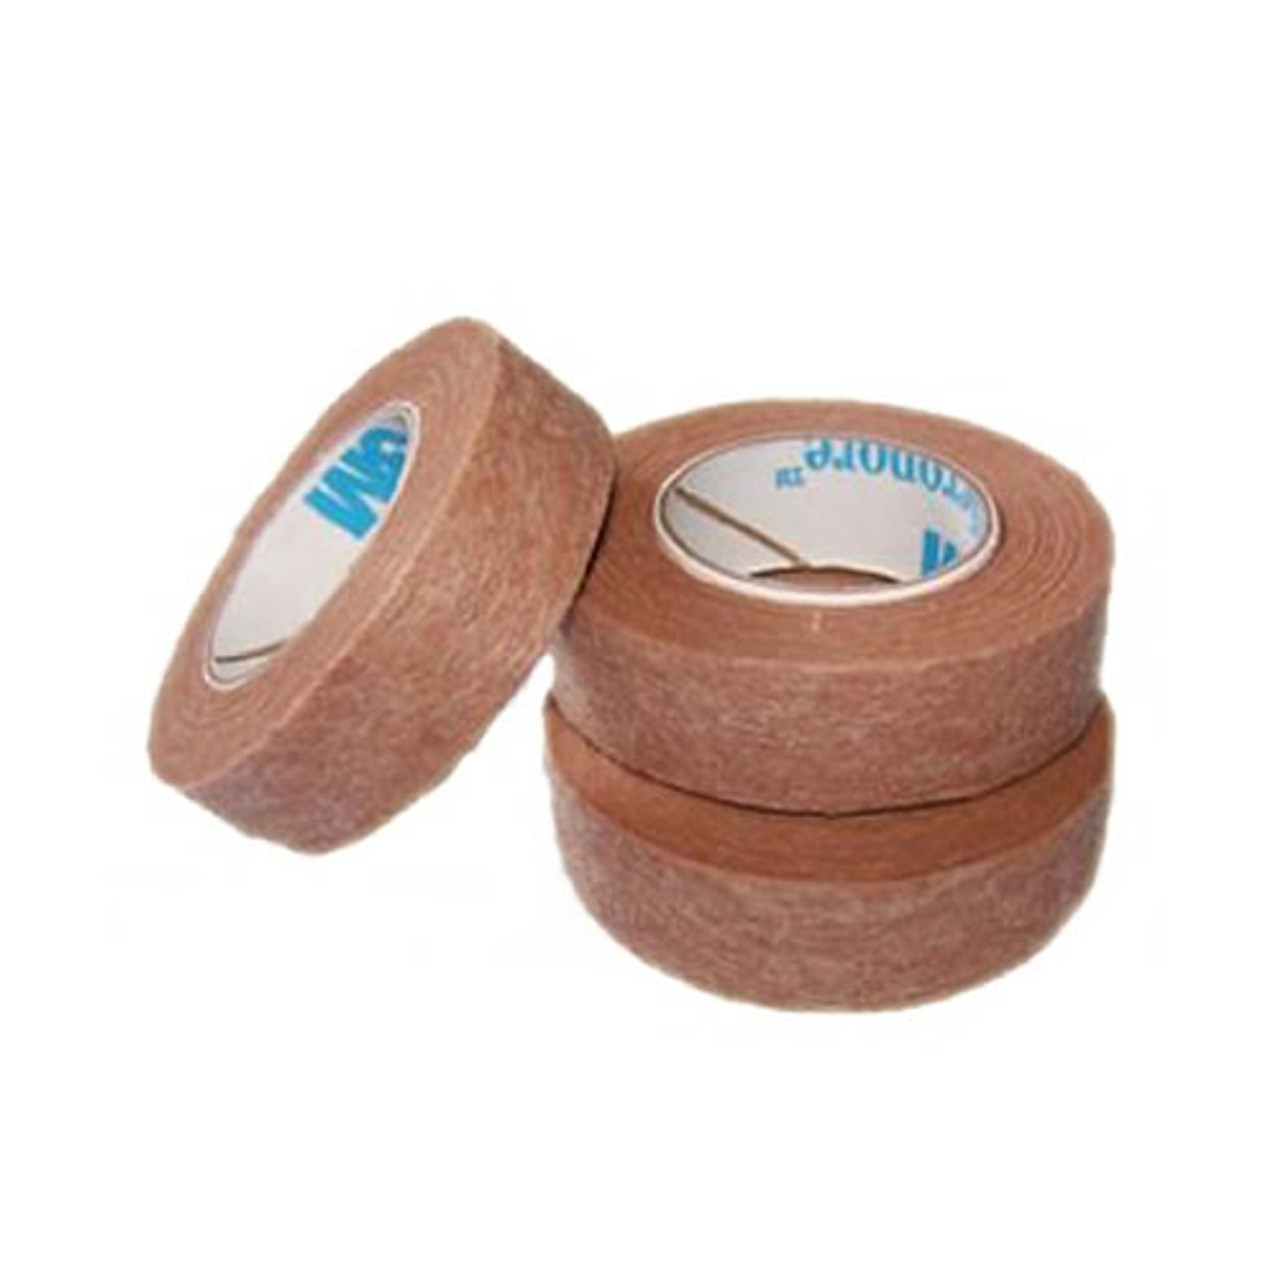 Tan Micropore Tape  Surgical Tape by 3M